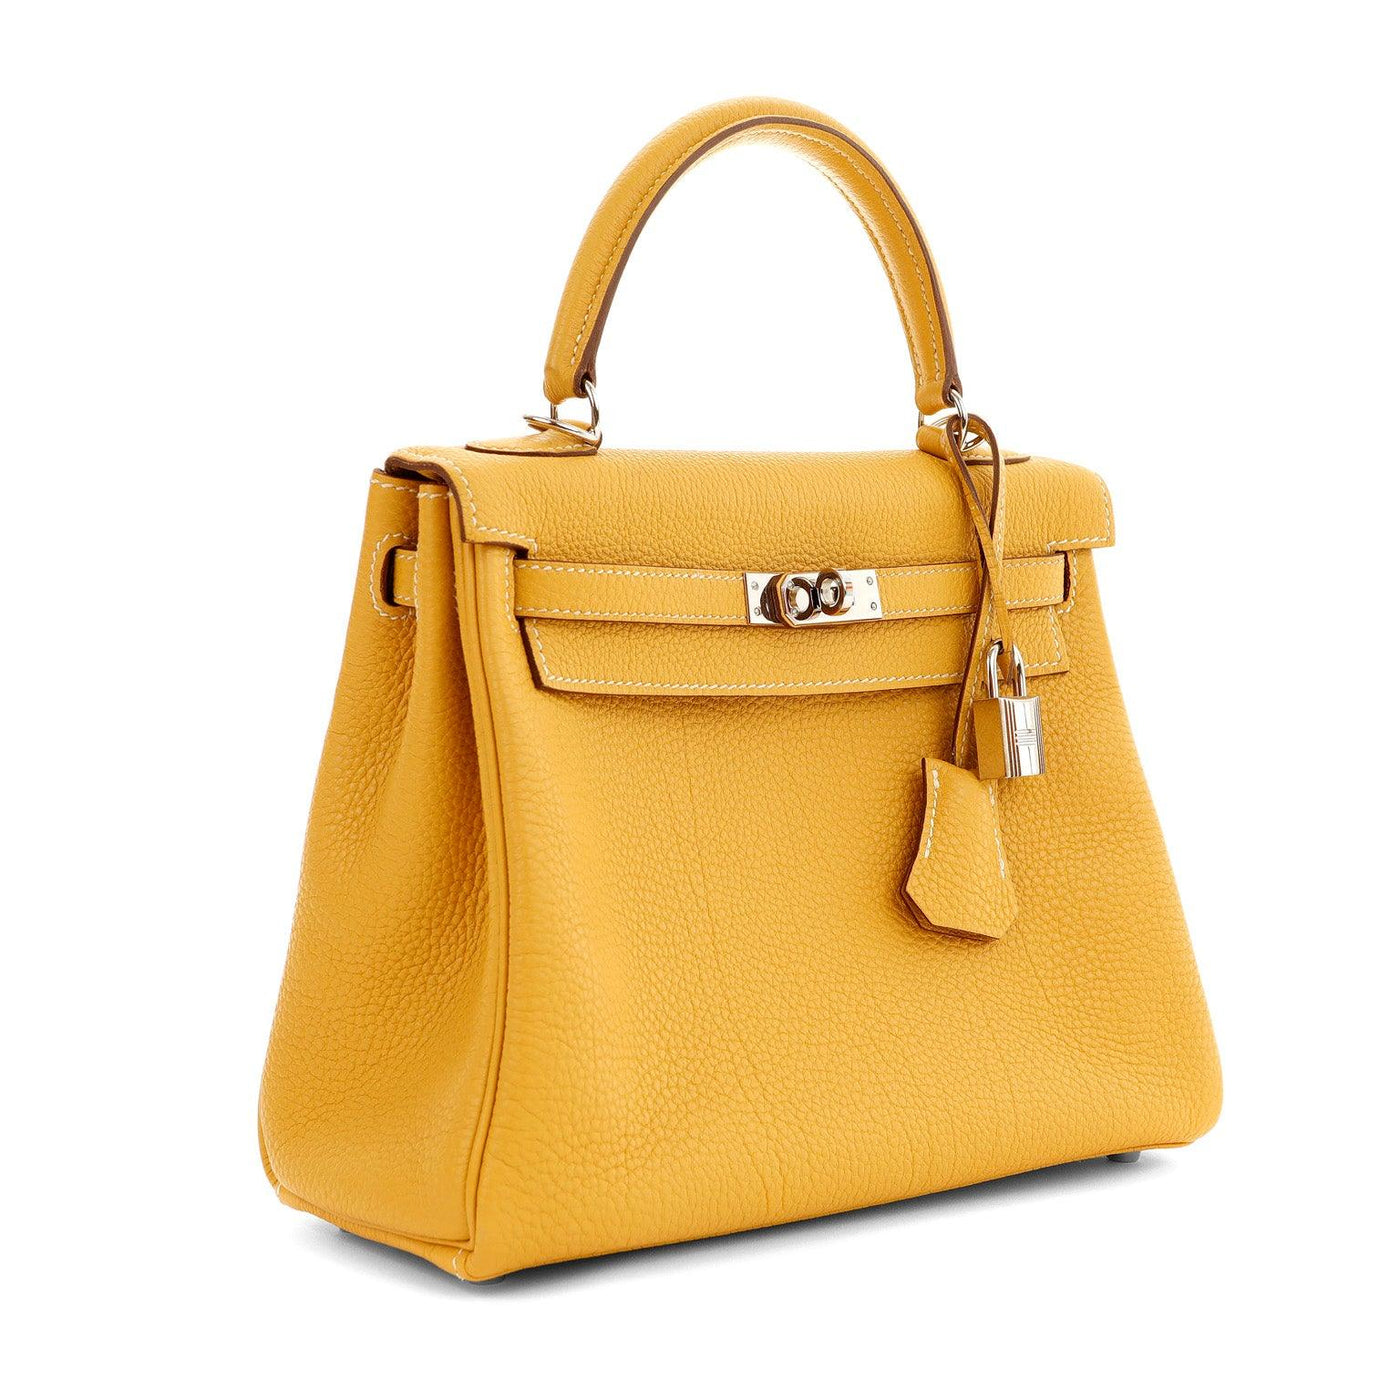 The Hermès 25cm Mustard Yellow Togo Kelly is a handbag from the luxury  brand Hermès – Only Authentics